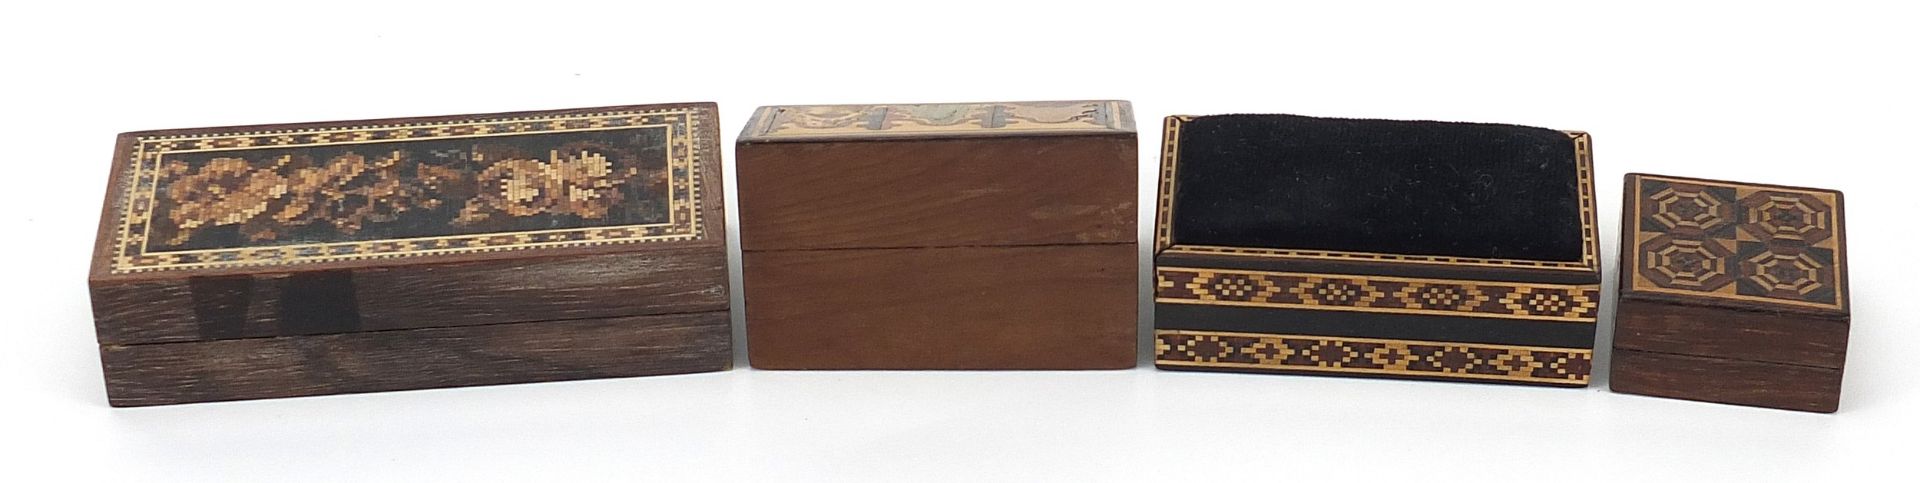 Victorian Tunbridge Ware with micro mosaic inlay comprising pin cushion and three boxes including - Image 2 of 3